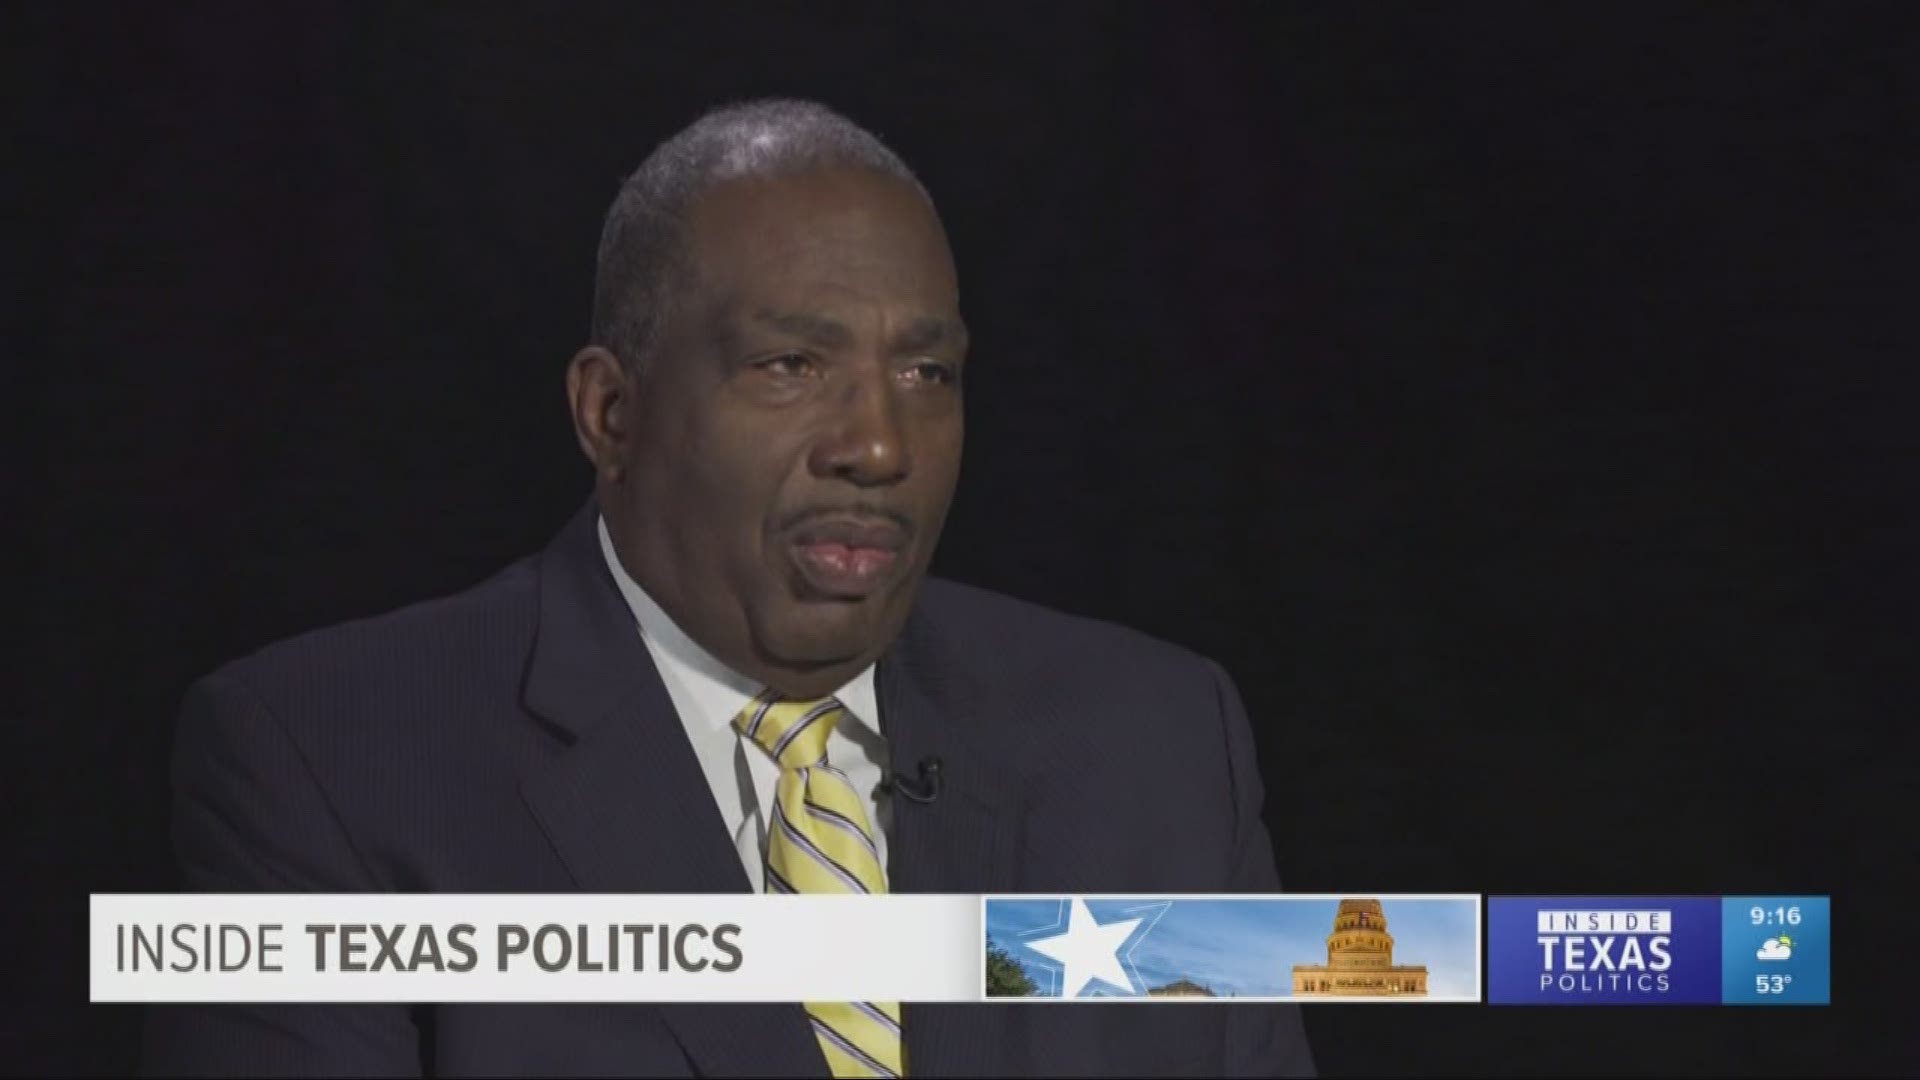 This week, state Sen. Royce West joined host Jason Whitely to discuss what sets his candidacy apart from the others, as well as the struggle to make the runoff.